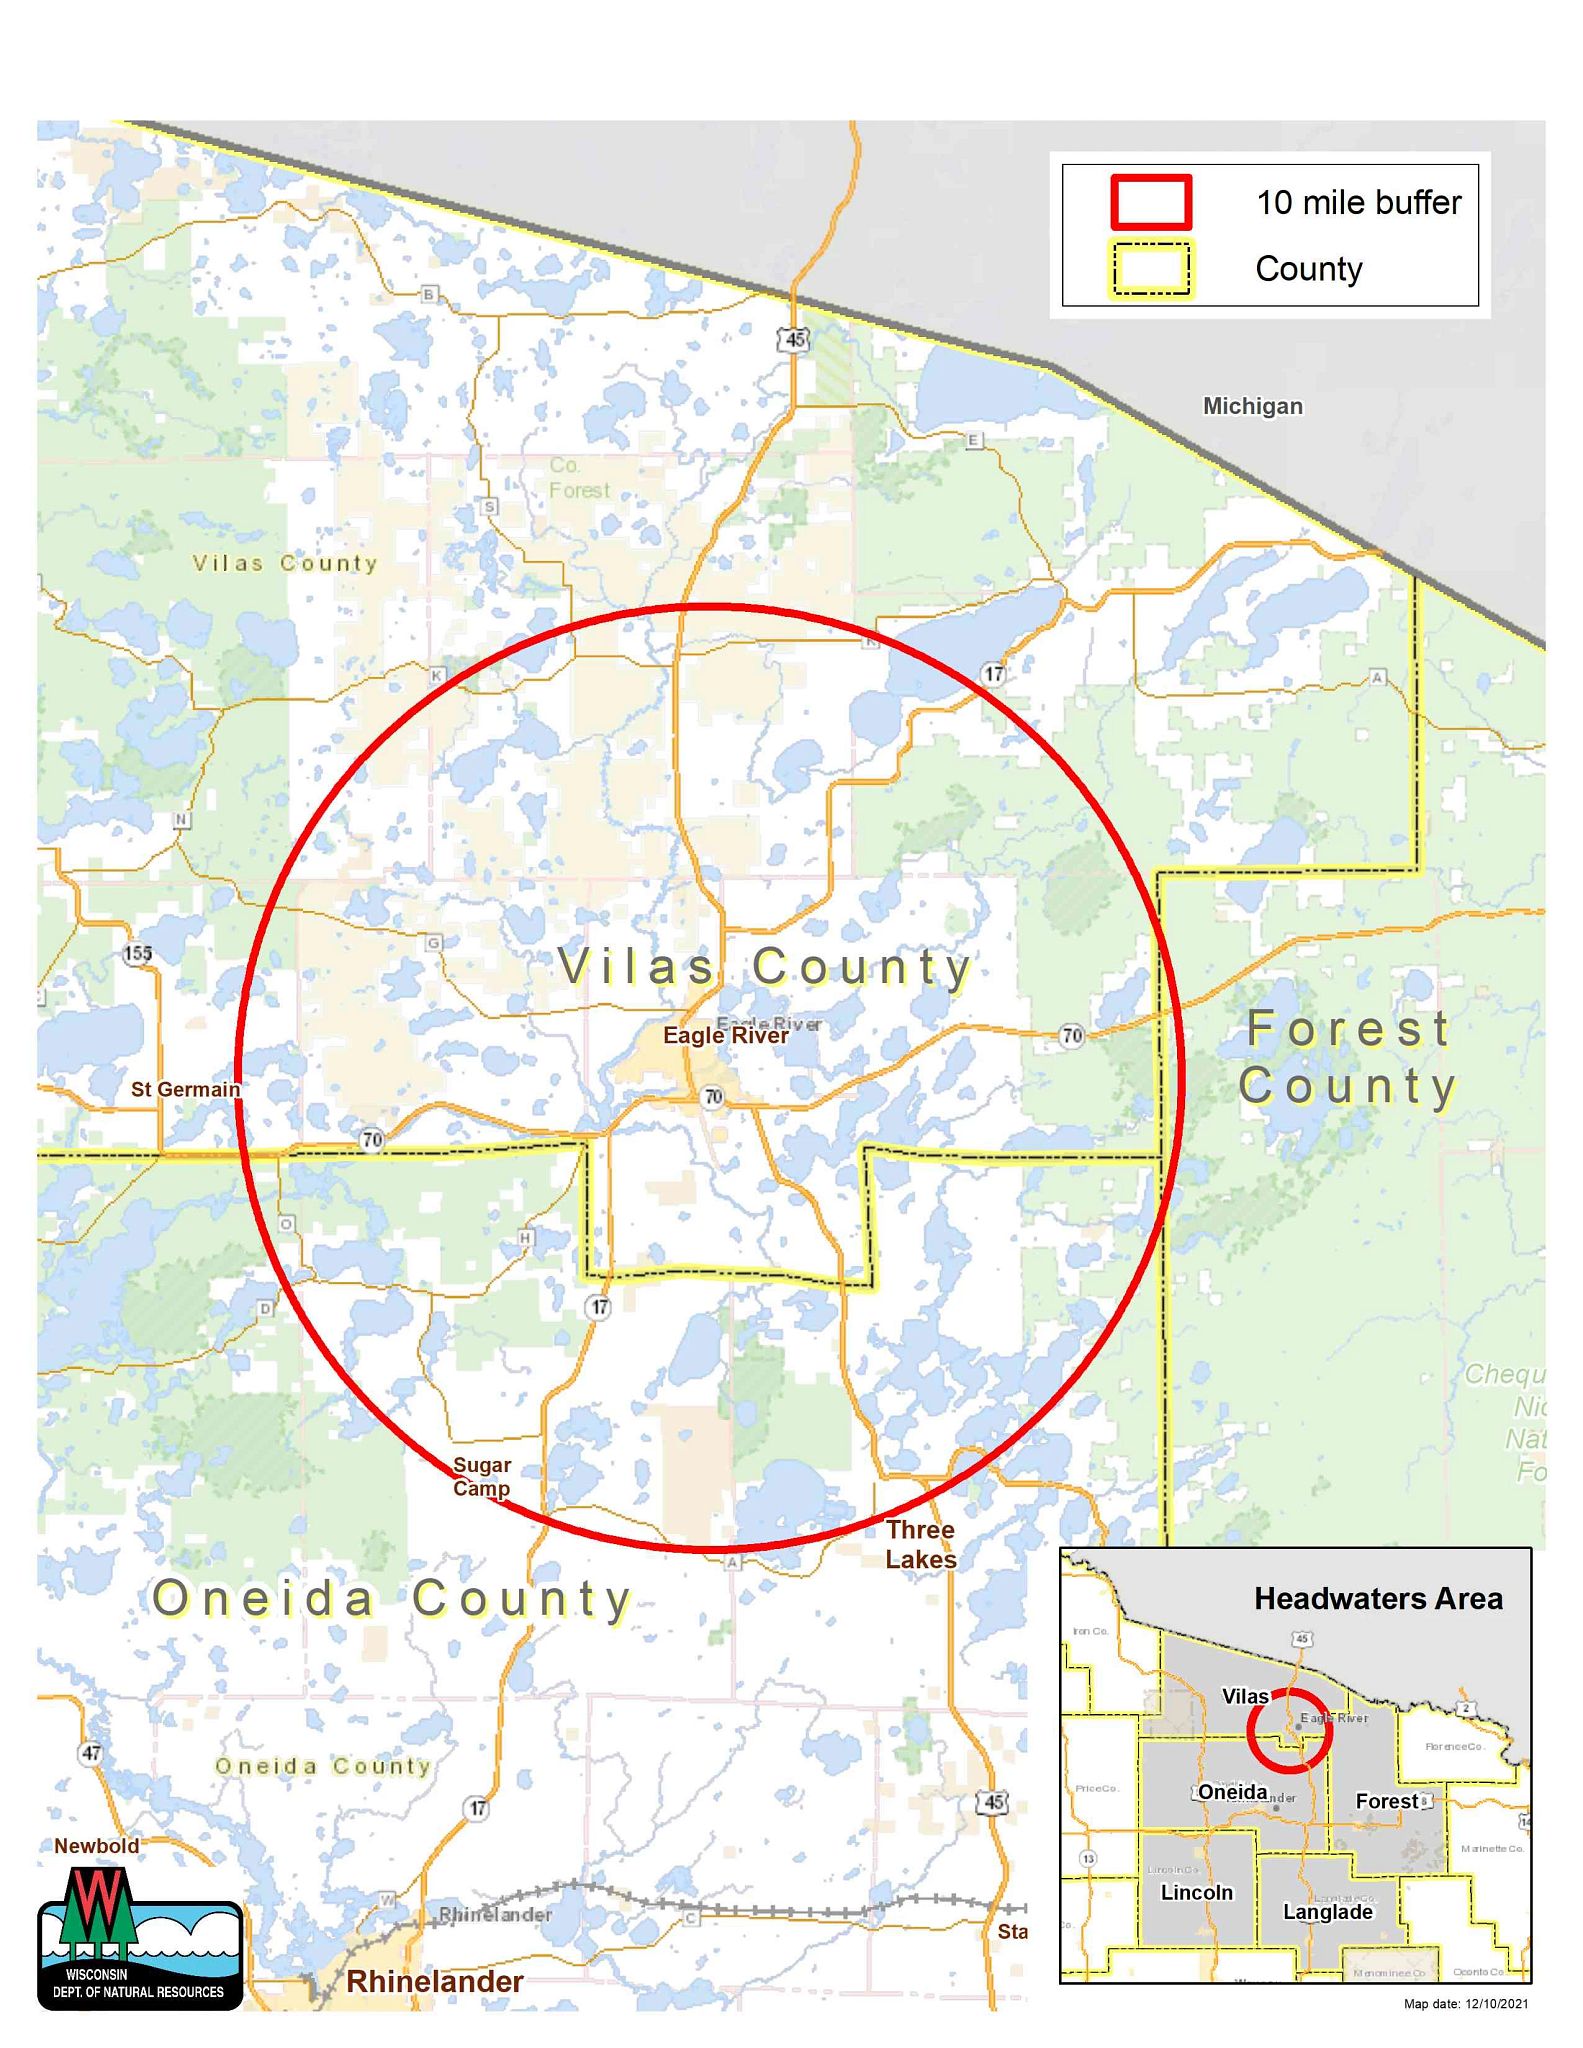 An image of a map of Wisconsin pinpointing a location of a Chronic Wasting Disease (CWD) location. 